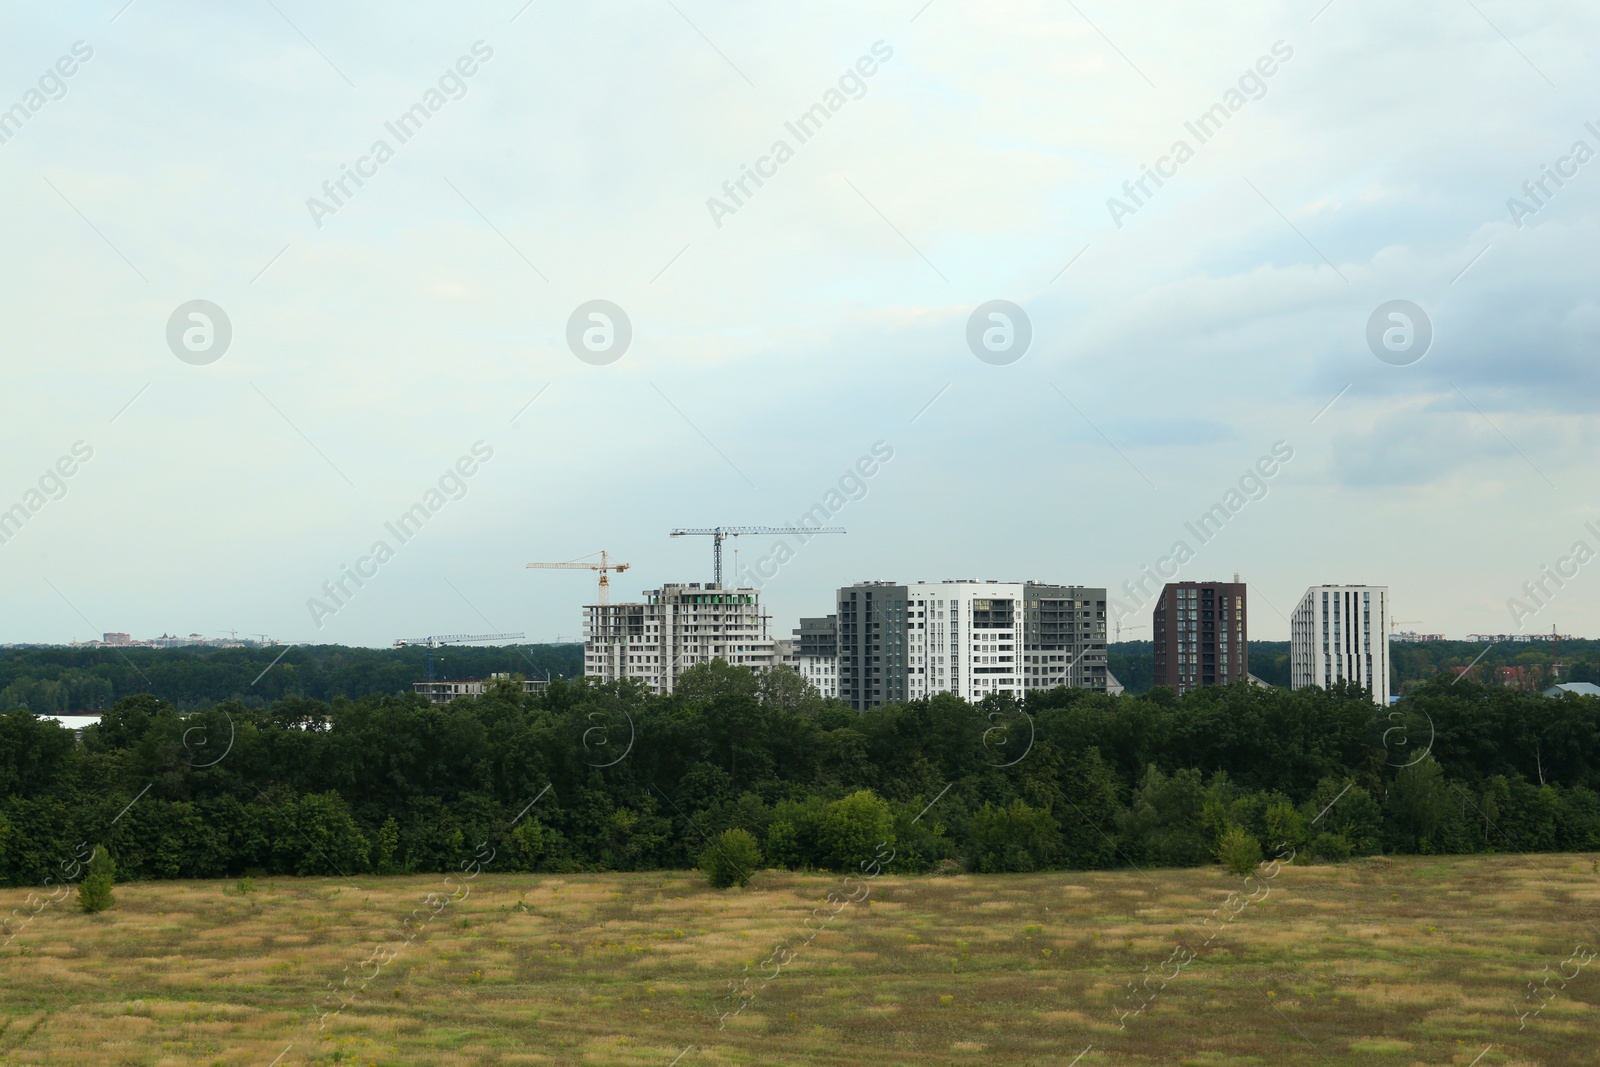 Photo of Beautiful landscape with trees, buildings and cranes on construction site